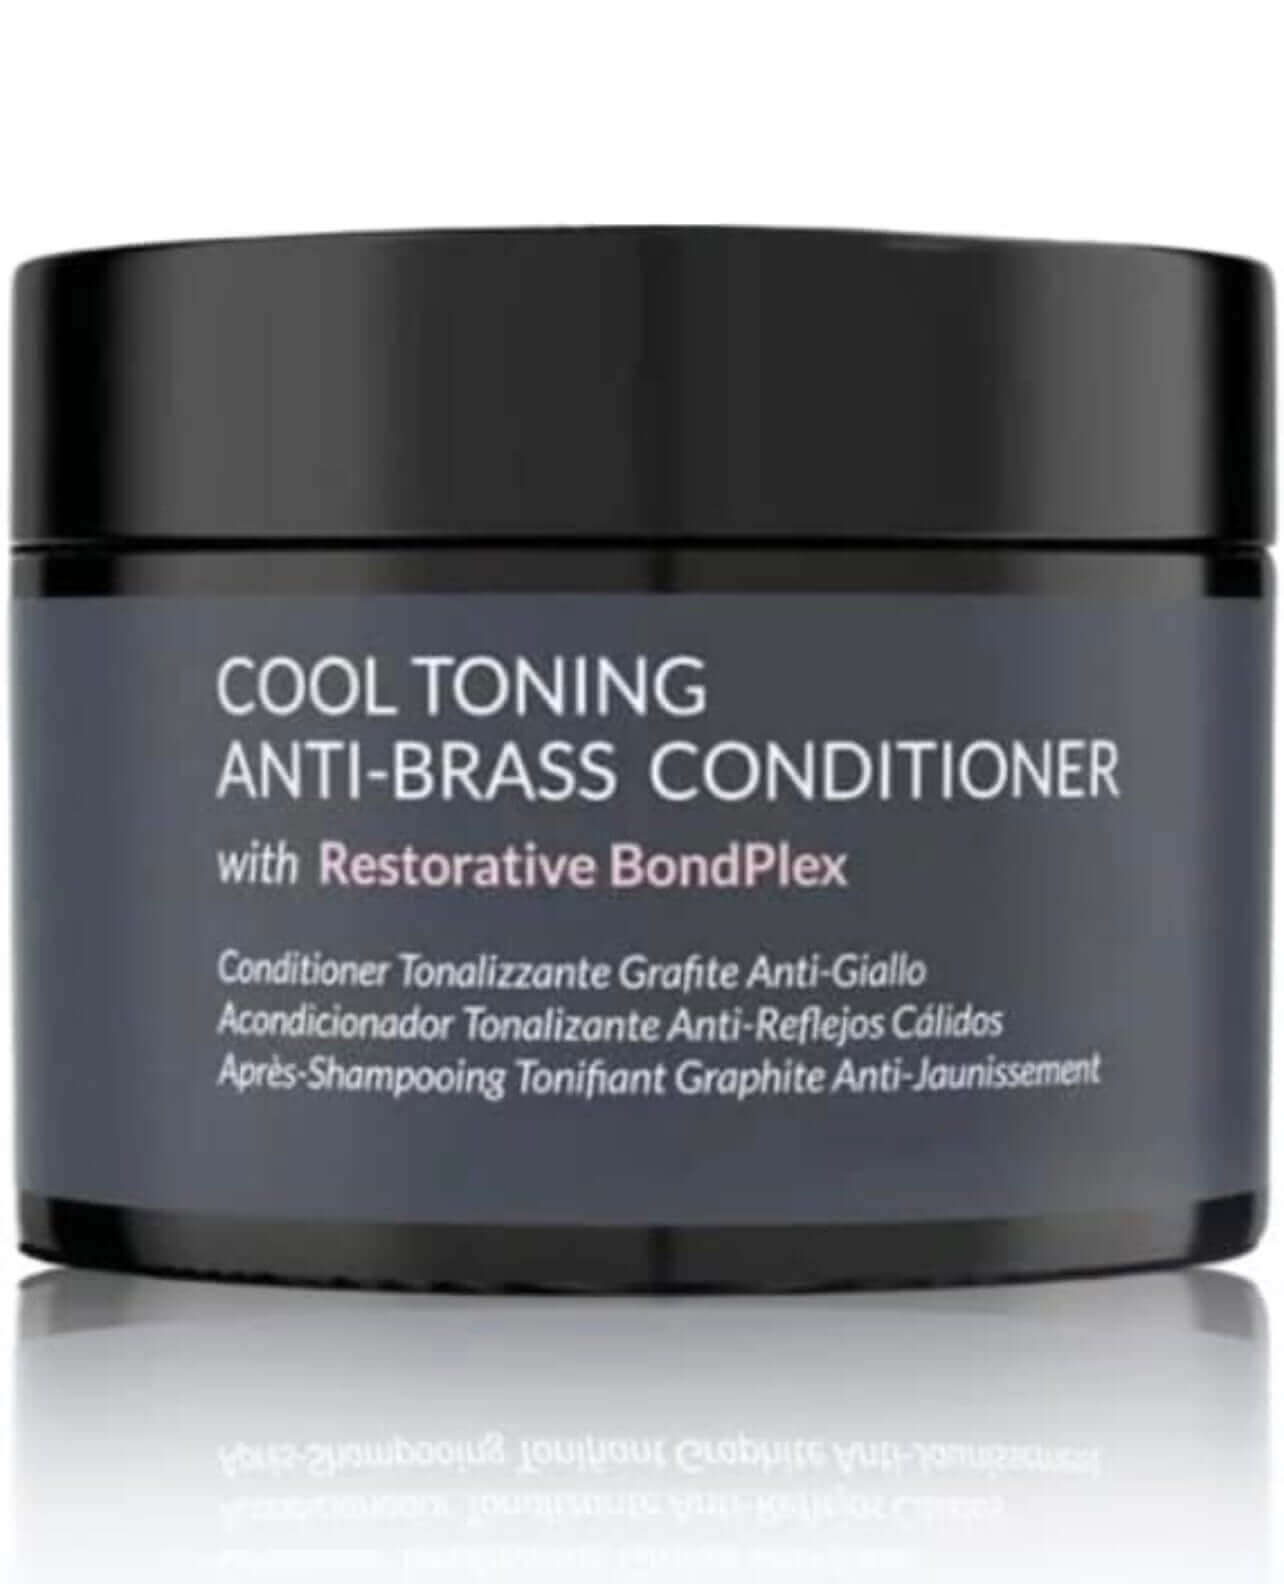 DIFIABA Charcolite Cool Toning Anti-Brass Conditioner a Conditioner from Simply Colour Hair Salon Studio & Online Store